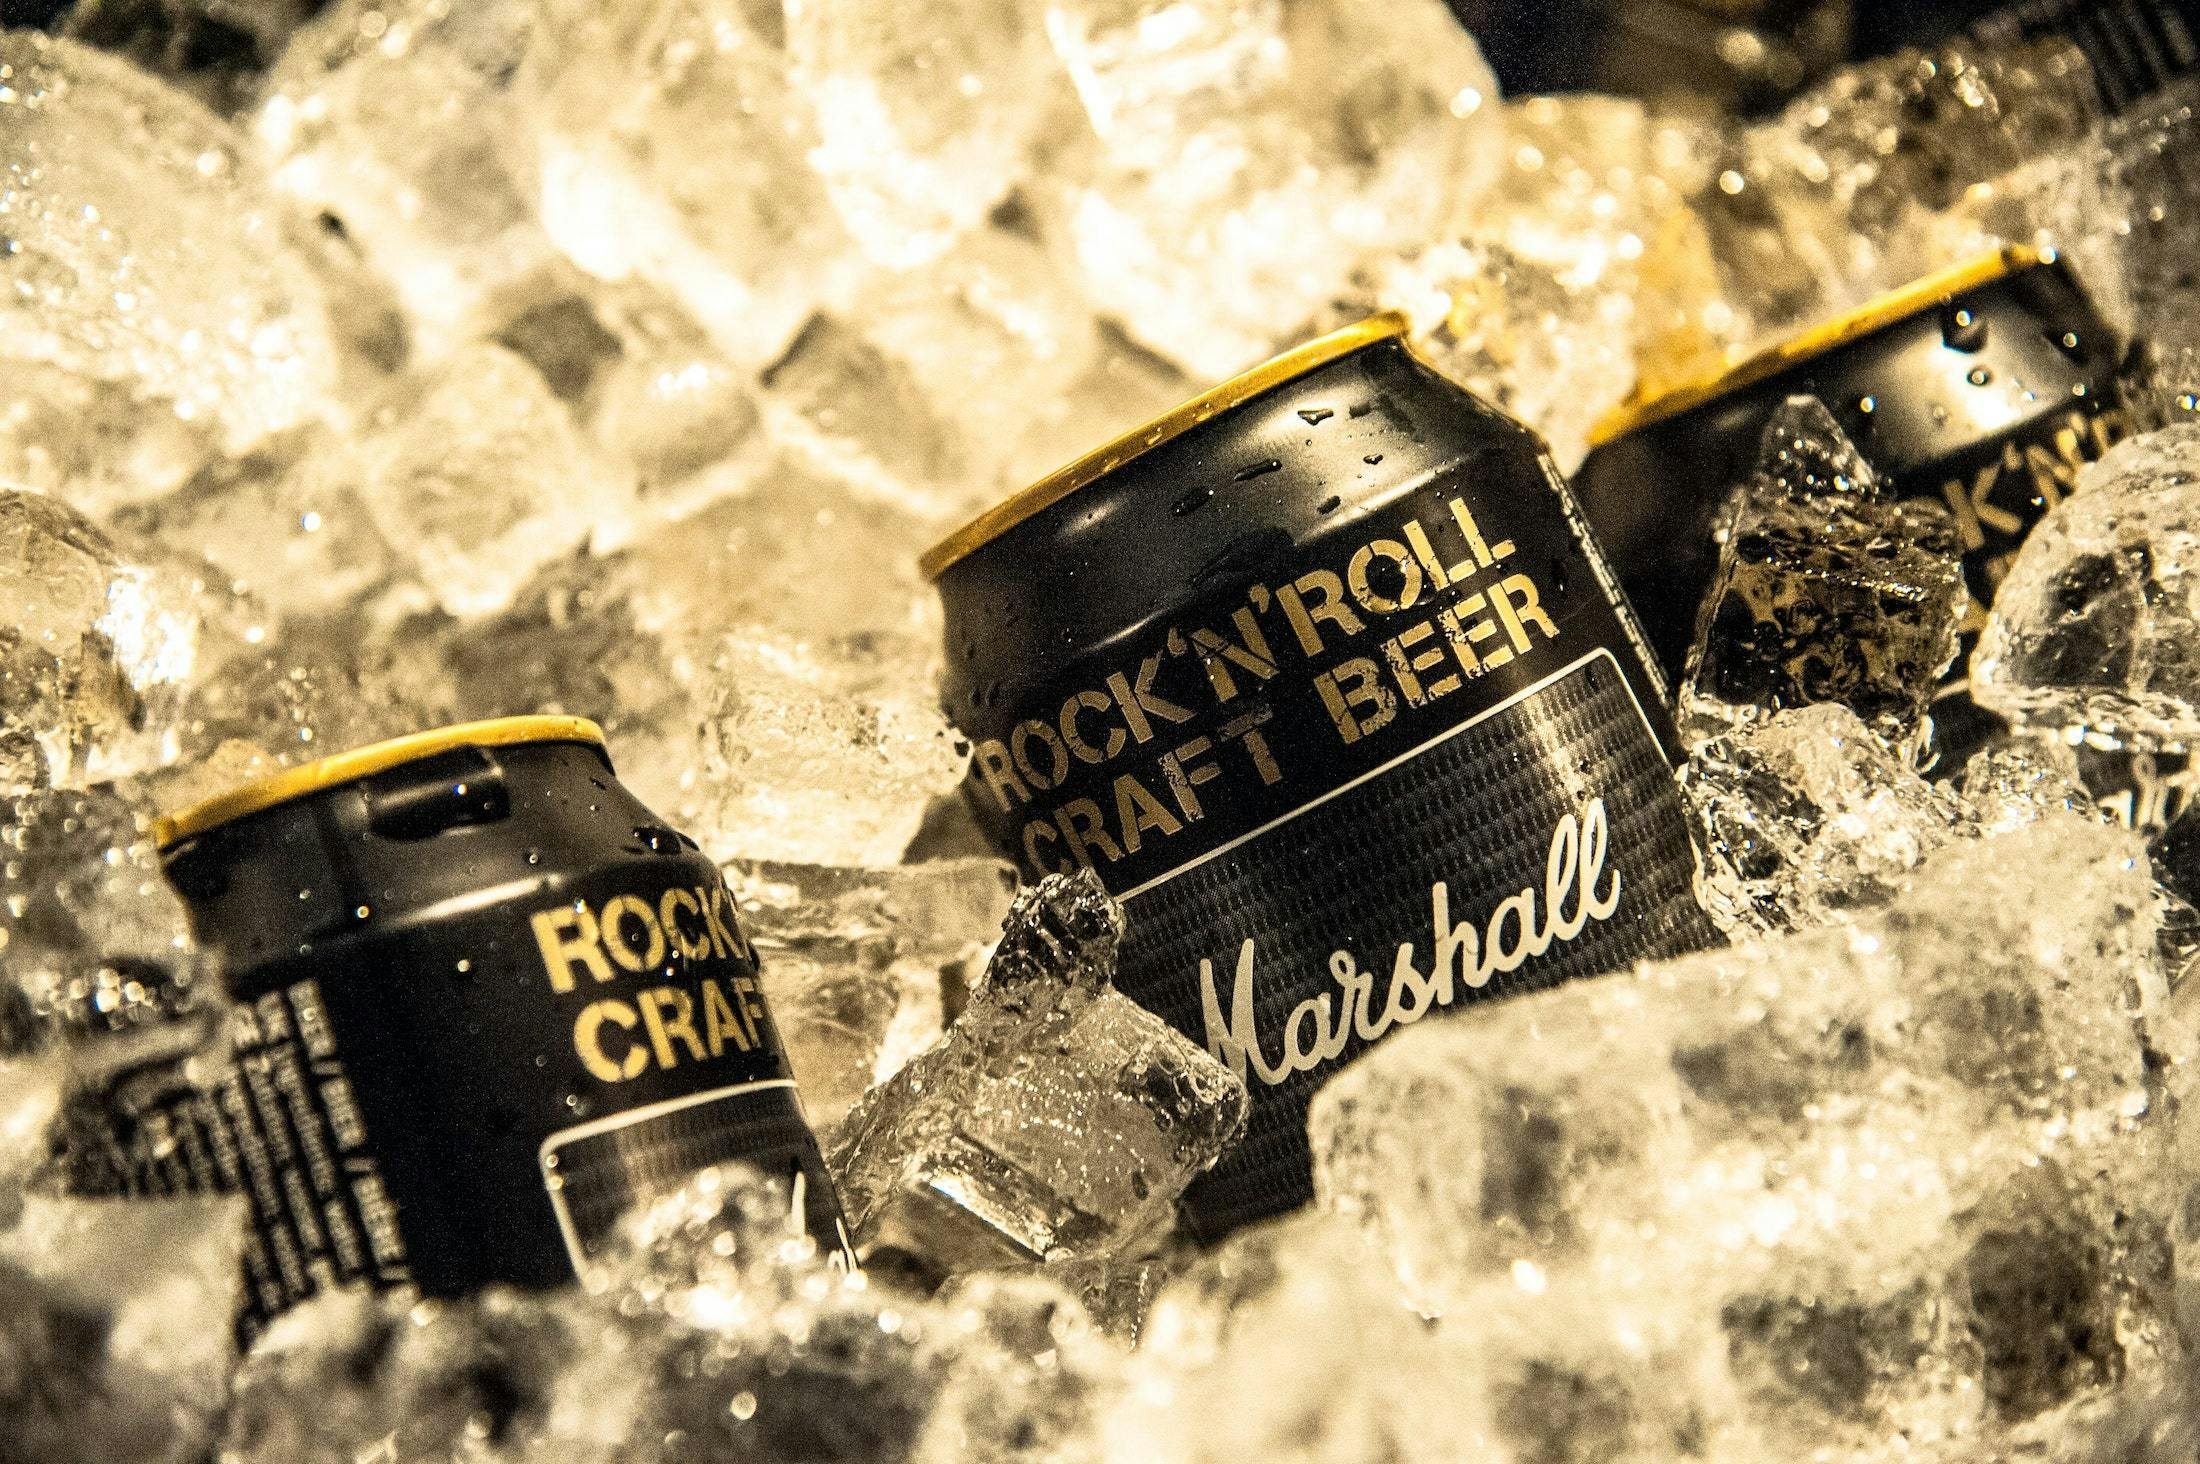 Marshall Amplification Introduce Three Craft Beers In Collaboration With William Bros. Brewing Company